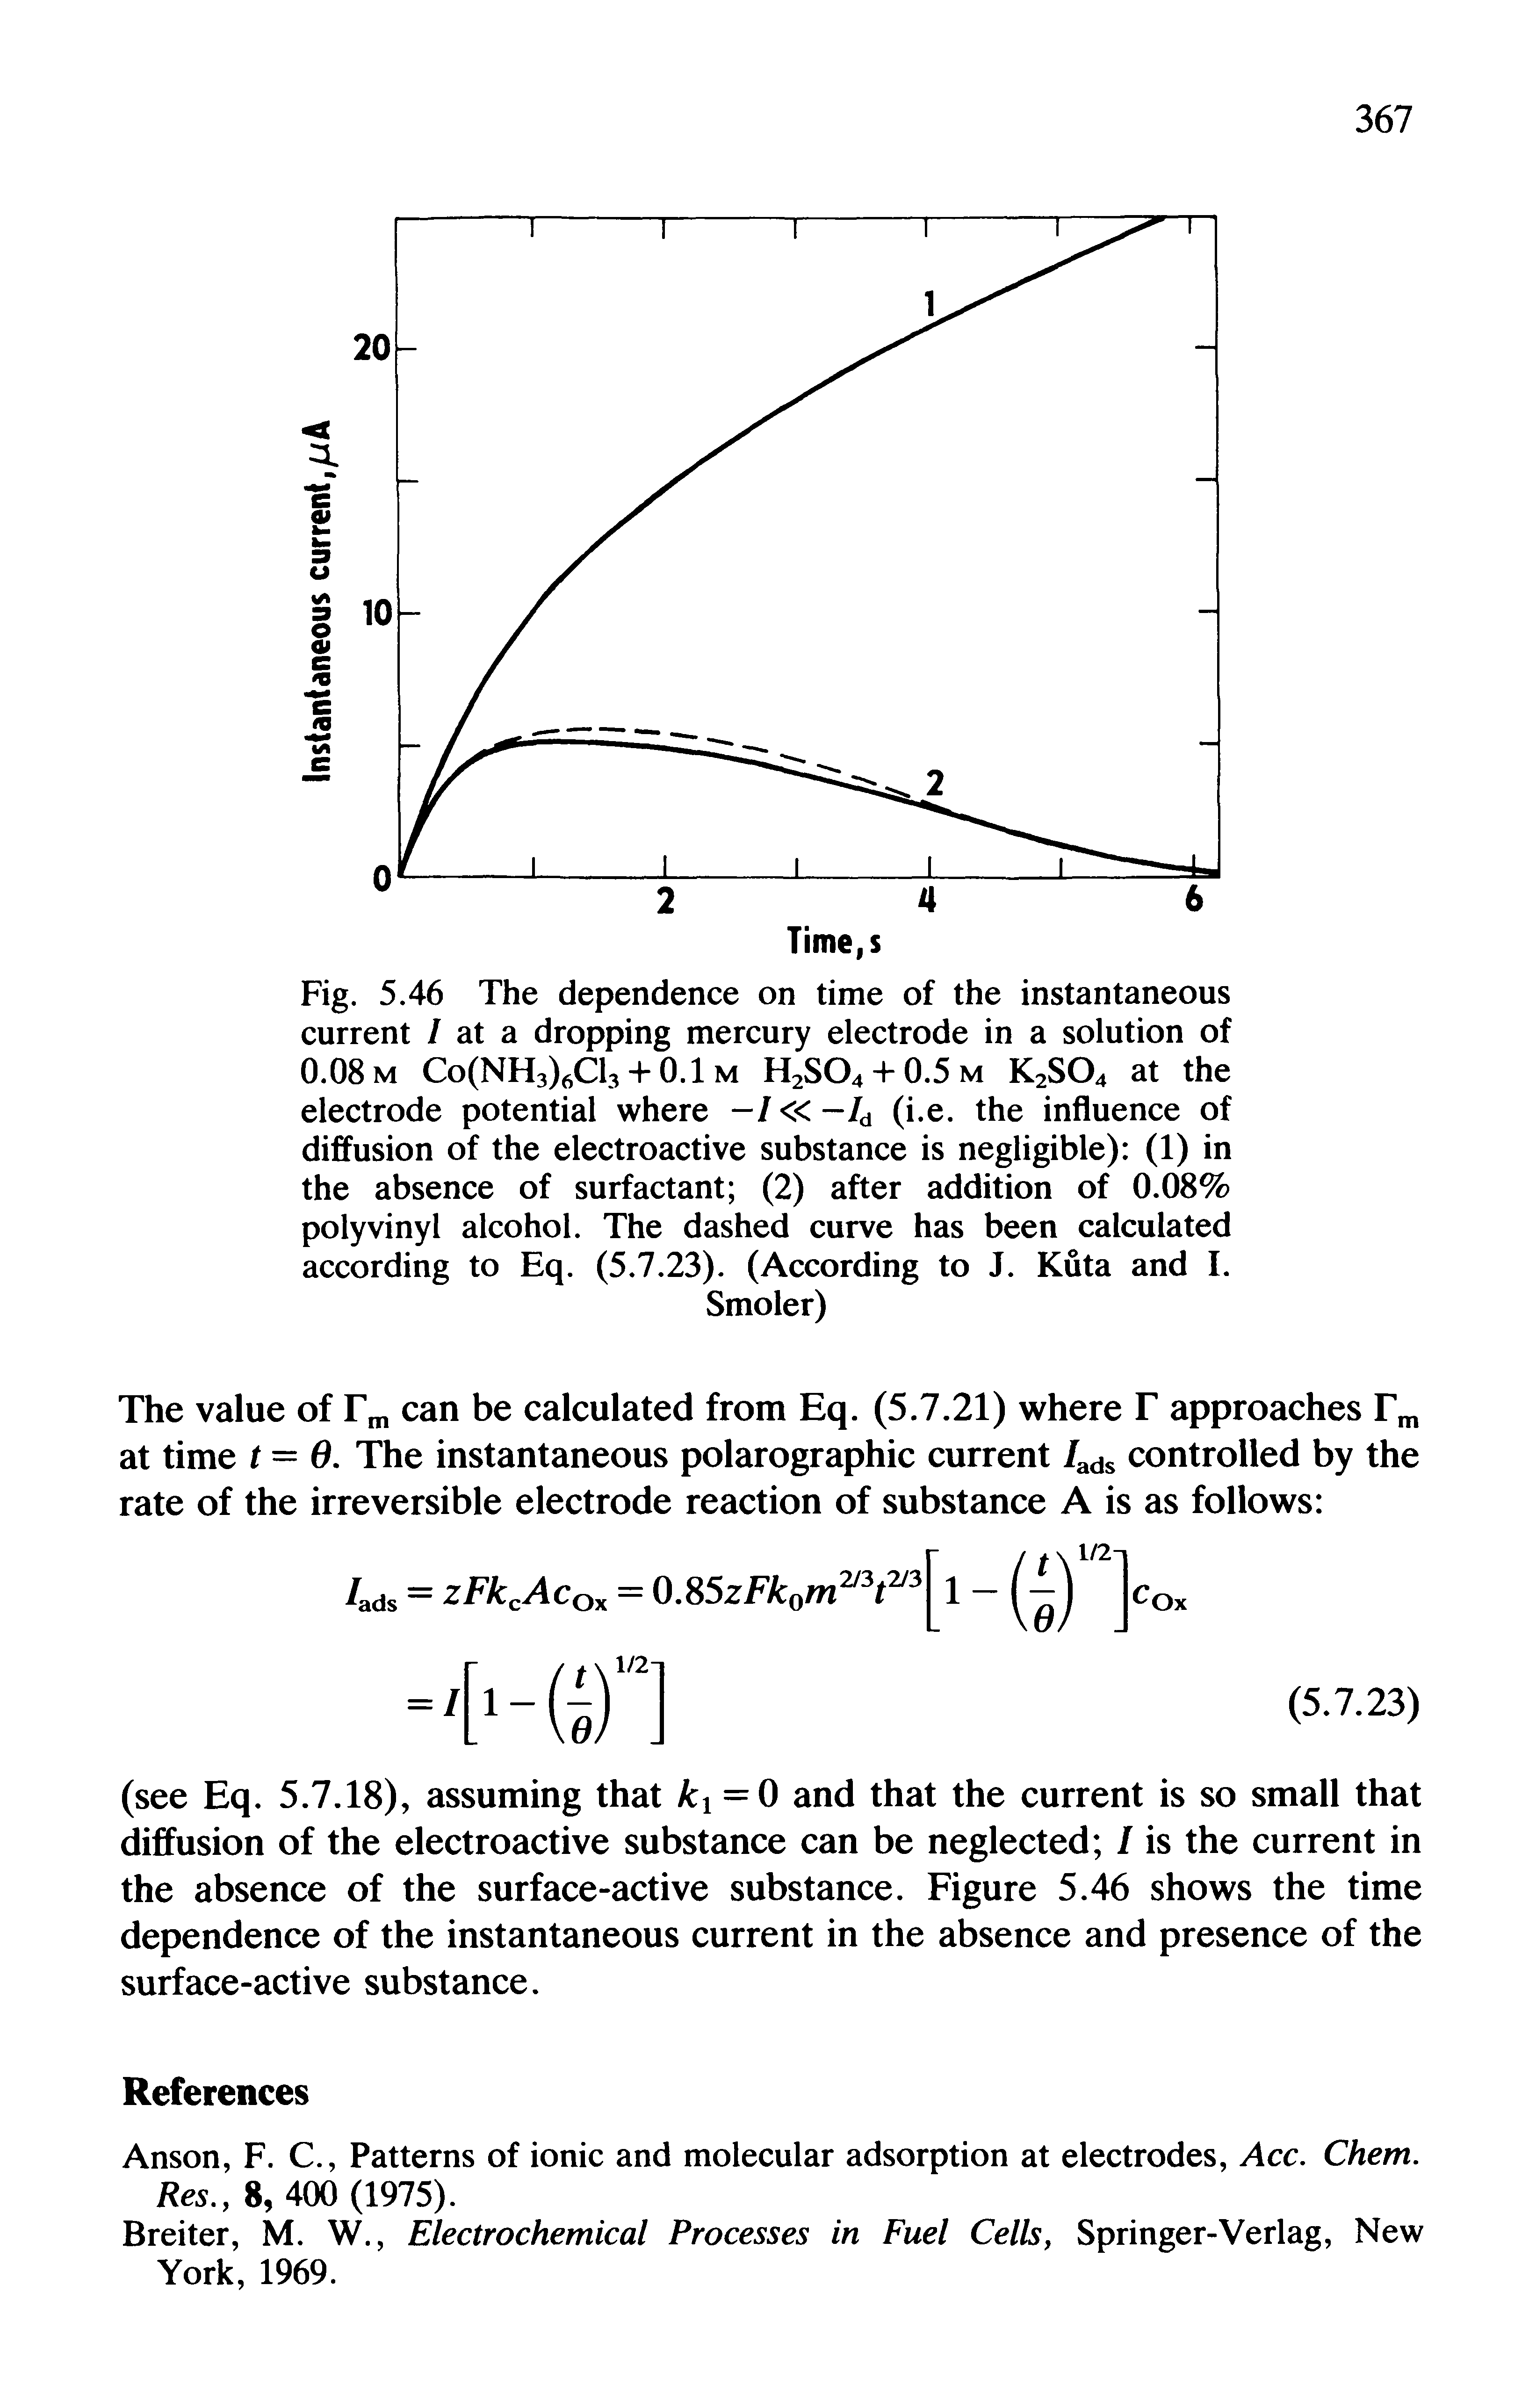 Fig. 5.46 The dependence on time of the instantaneous current / at a dropping mercury electrode in a solution of 0.08 m Co(NH3)6C13 + 0.1 m H2SO4 + 0.5m K2S04 at the electrode potential where -7 -/d (i.e. the influence of diffusion of the electroactive substance is negligible) (1) in the absence of surfactant (2) after addition of 0.08% polyvinyl alcohol. The dashed curve has been calculated according to Eq. (5.7.23). (According to J. Kuta and I.